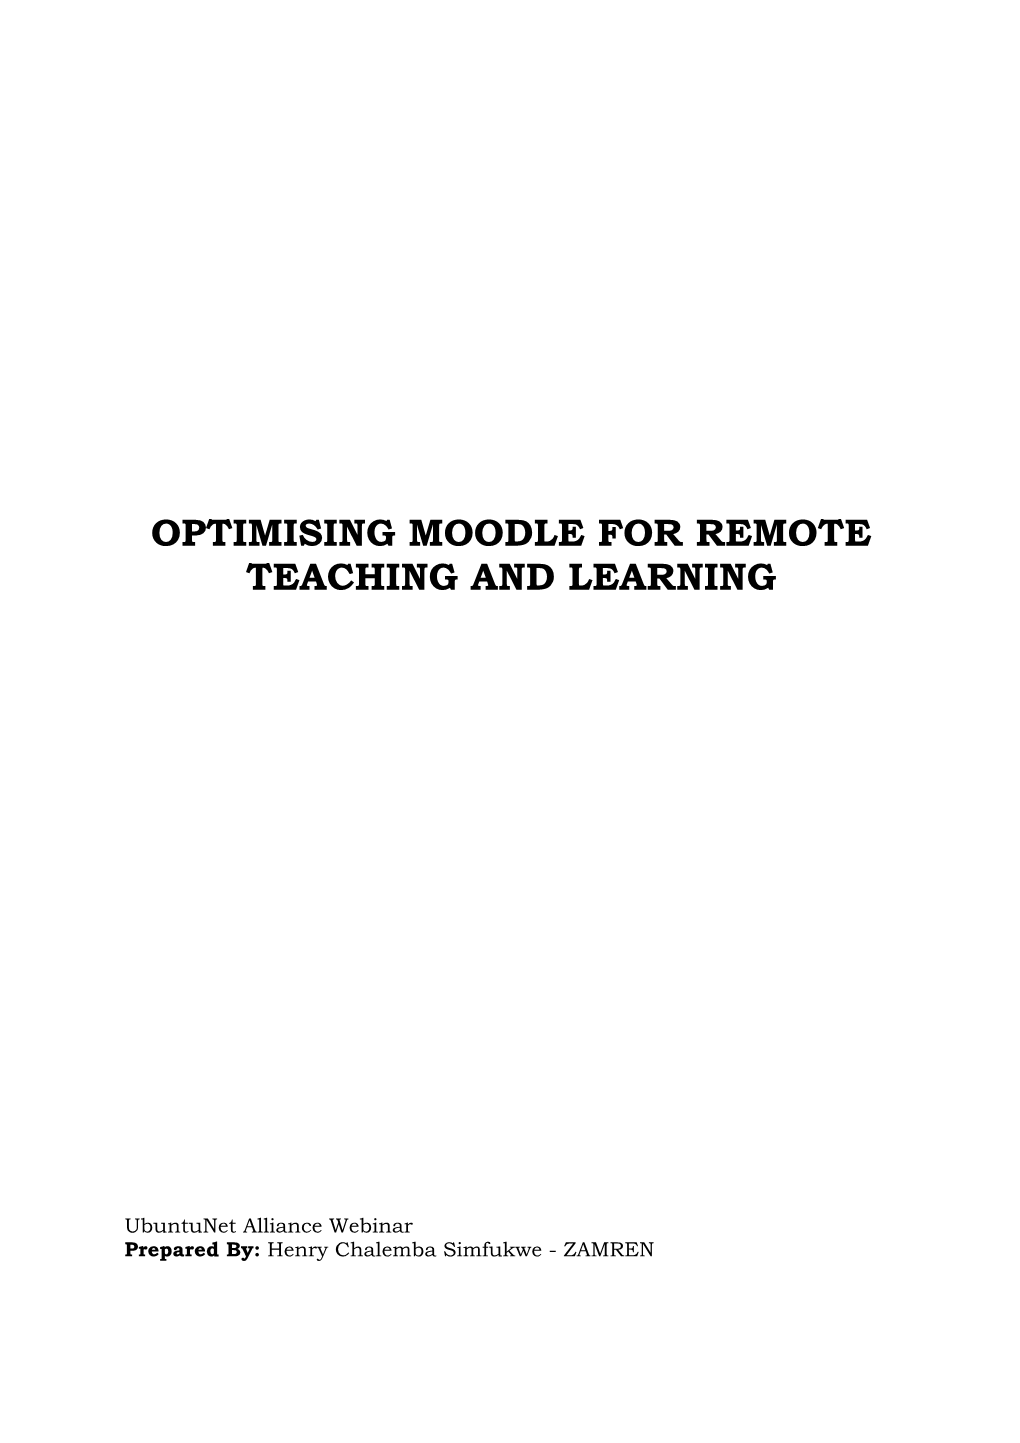 Optimising Moodle for Remote Teaching and Learning